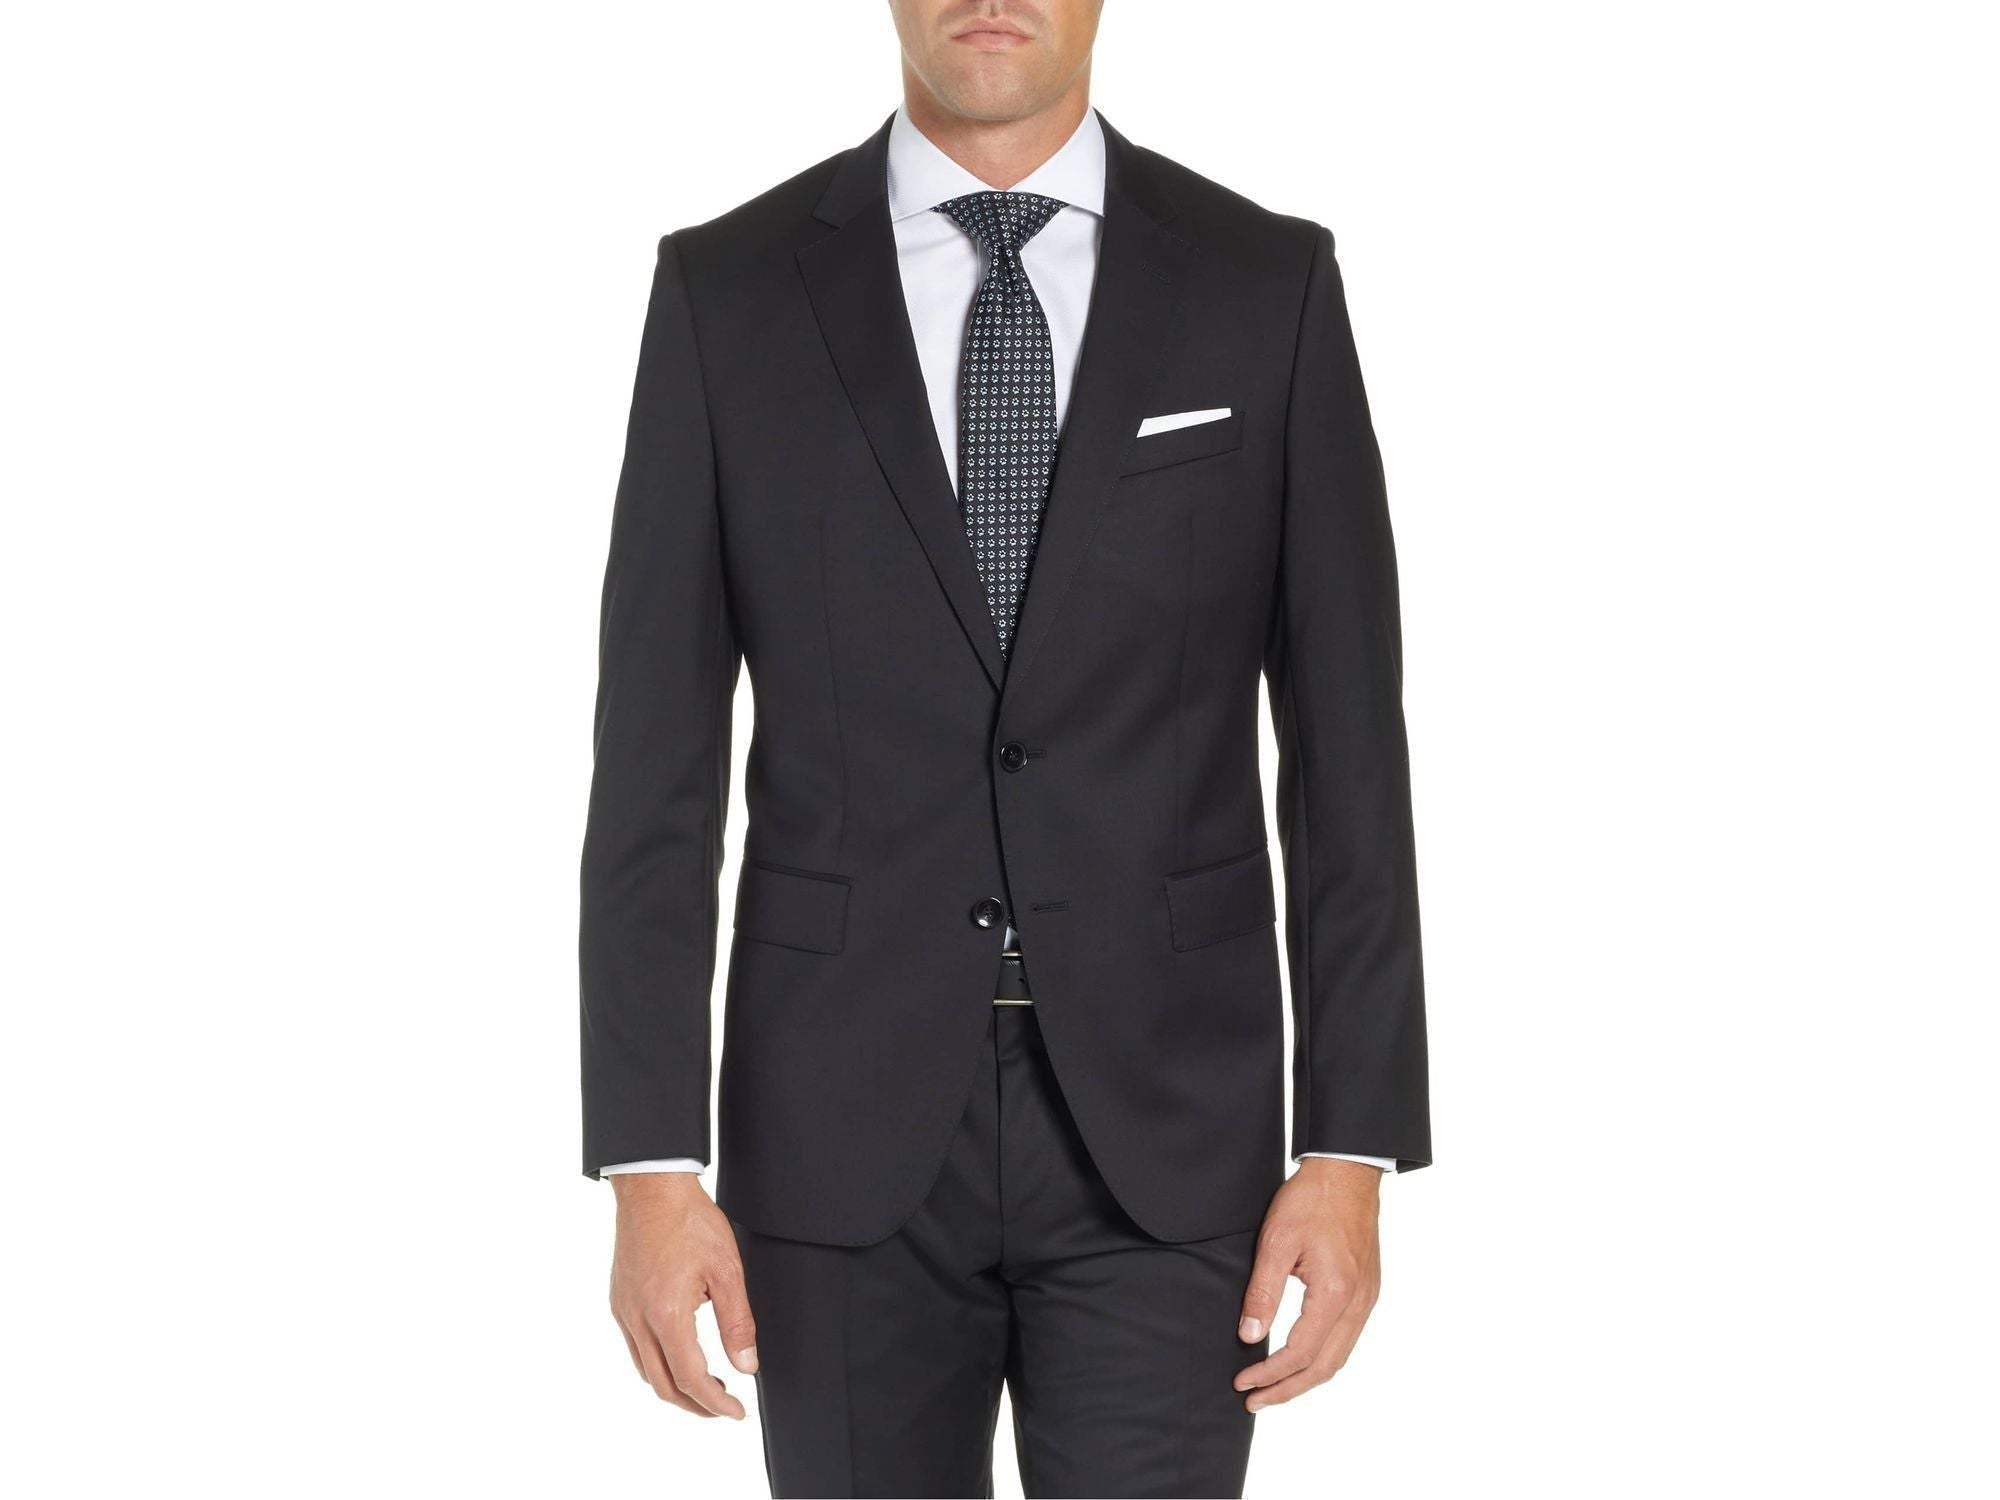 Rainwater's Luxury Collection Black Modern Fit Suit - Rainwater's Men's Clothing and Tuxedo Rental